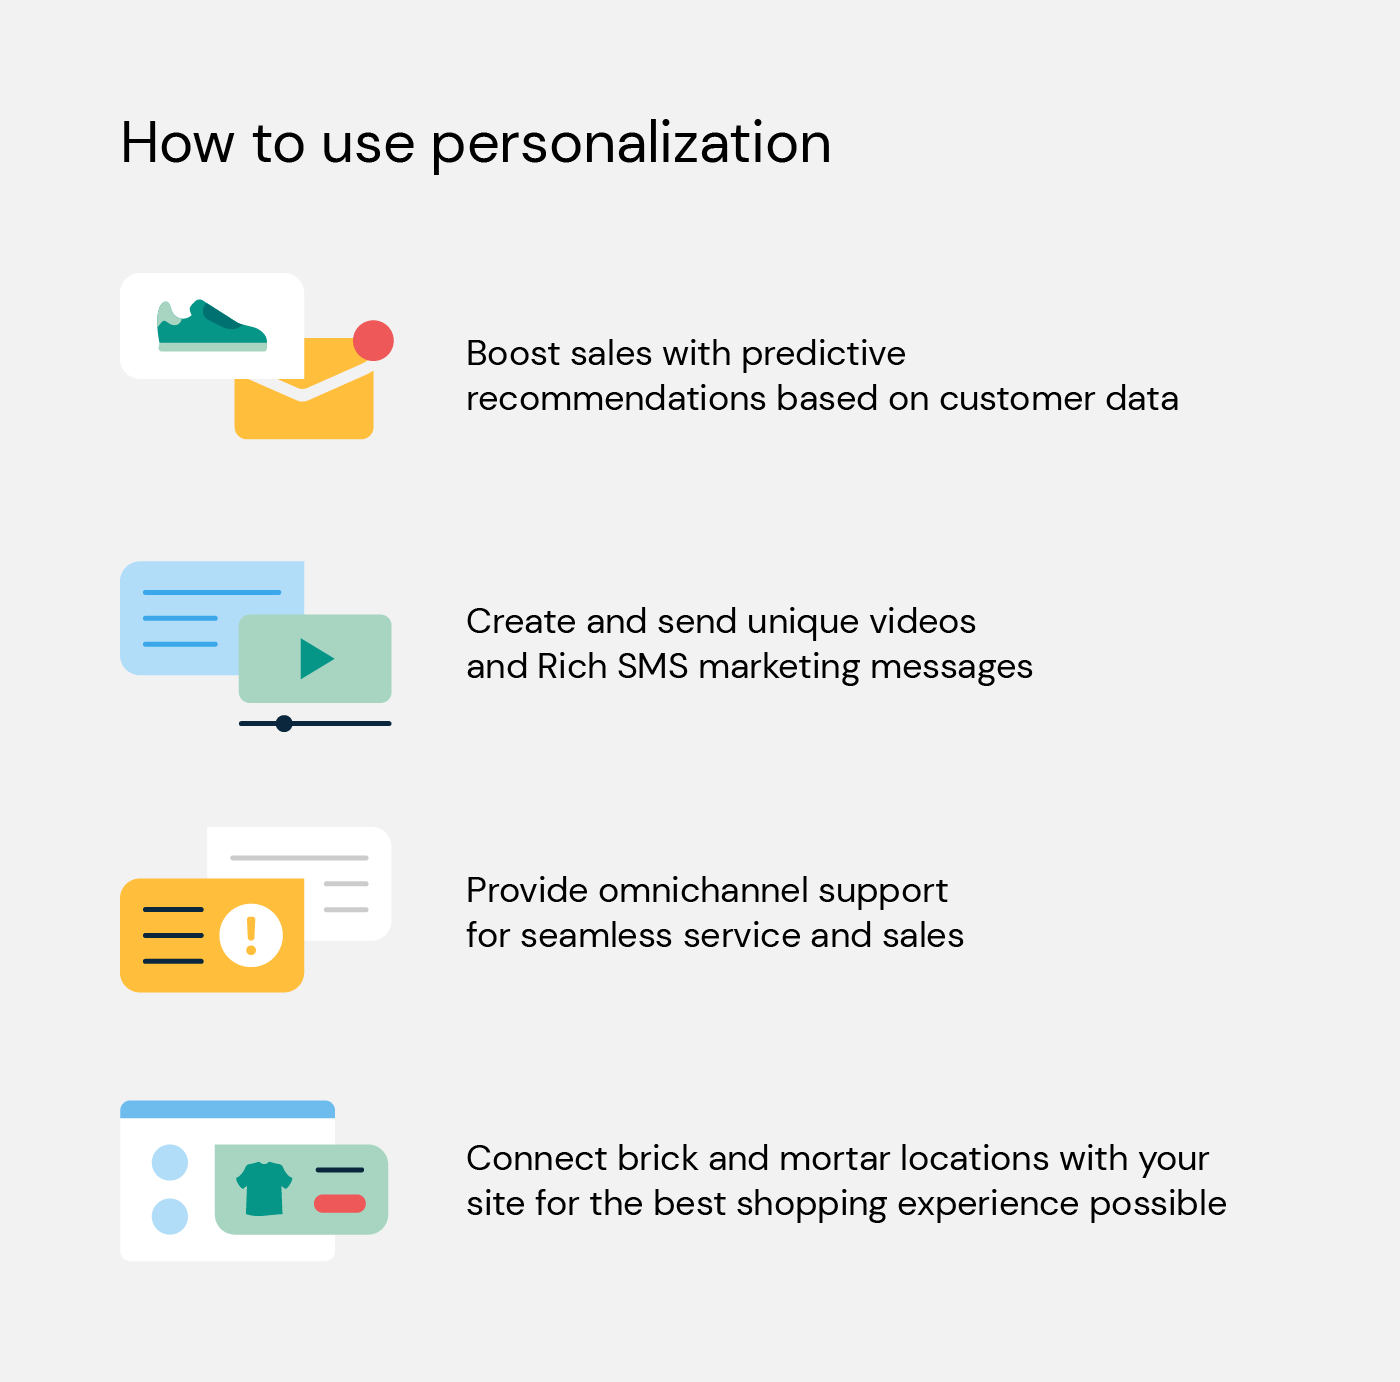 Illustration shows different ways for businesses to use personalization with customers